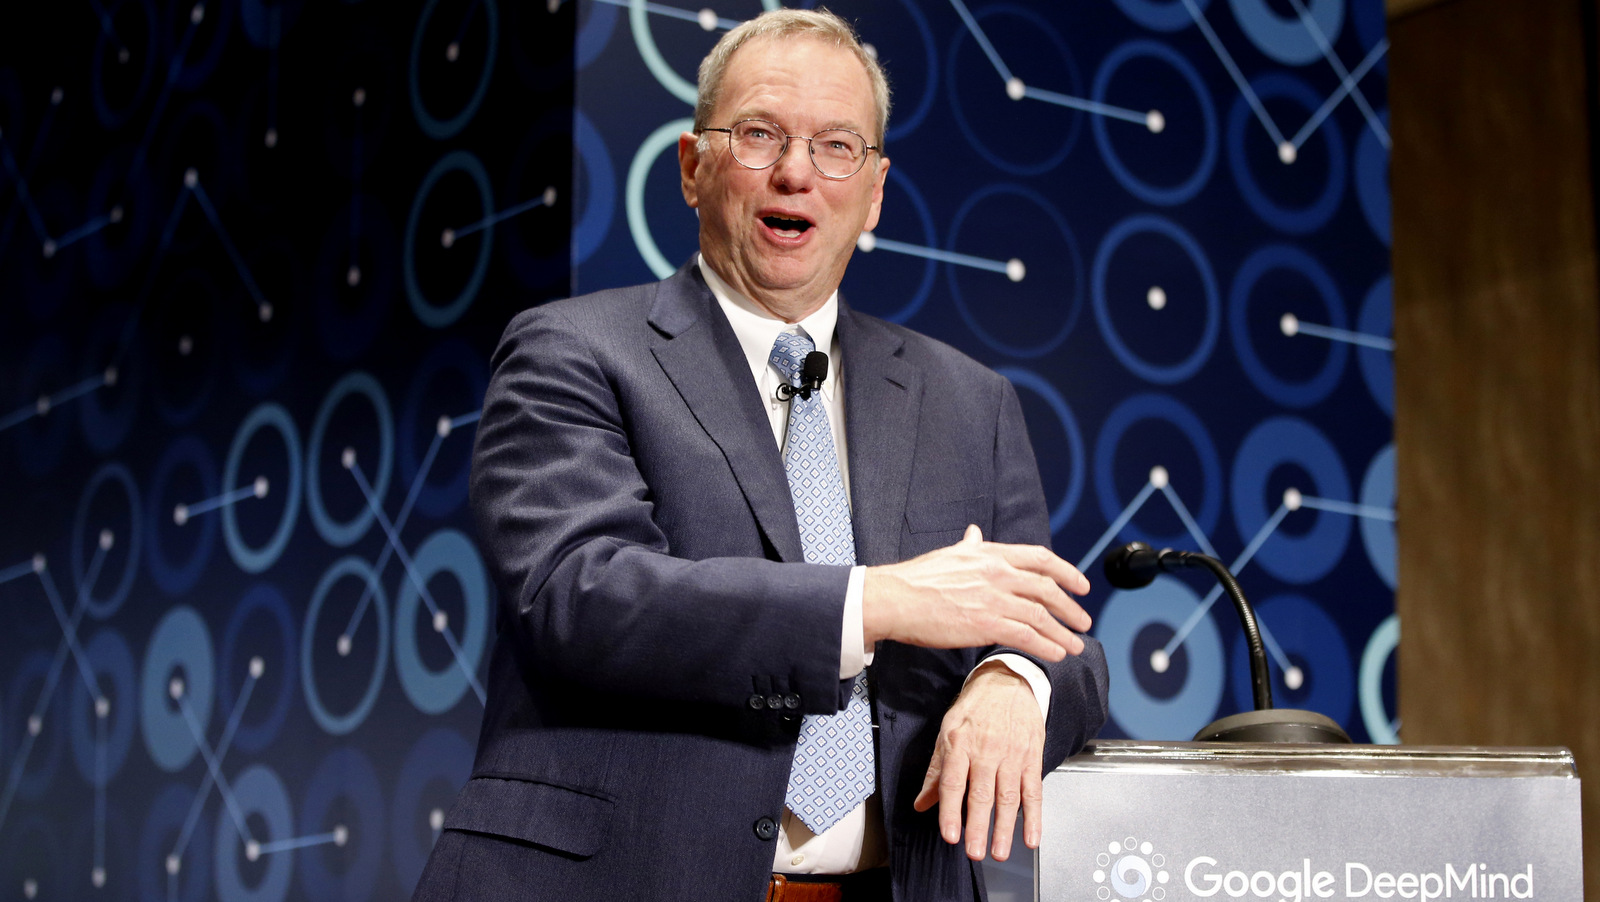 Eric Schmidt, then-executive chairman of Alphabet, speaks during a press conference ahead of the Google DeepMind Challenge Match in Seoul, South Korea, March 8, 2016. (AP Photo/Lee Jin-man)